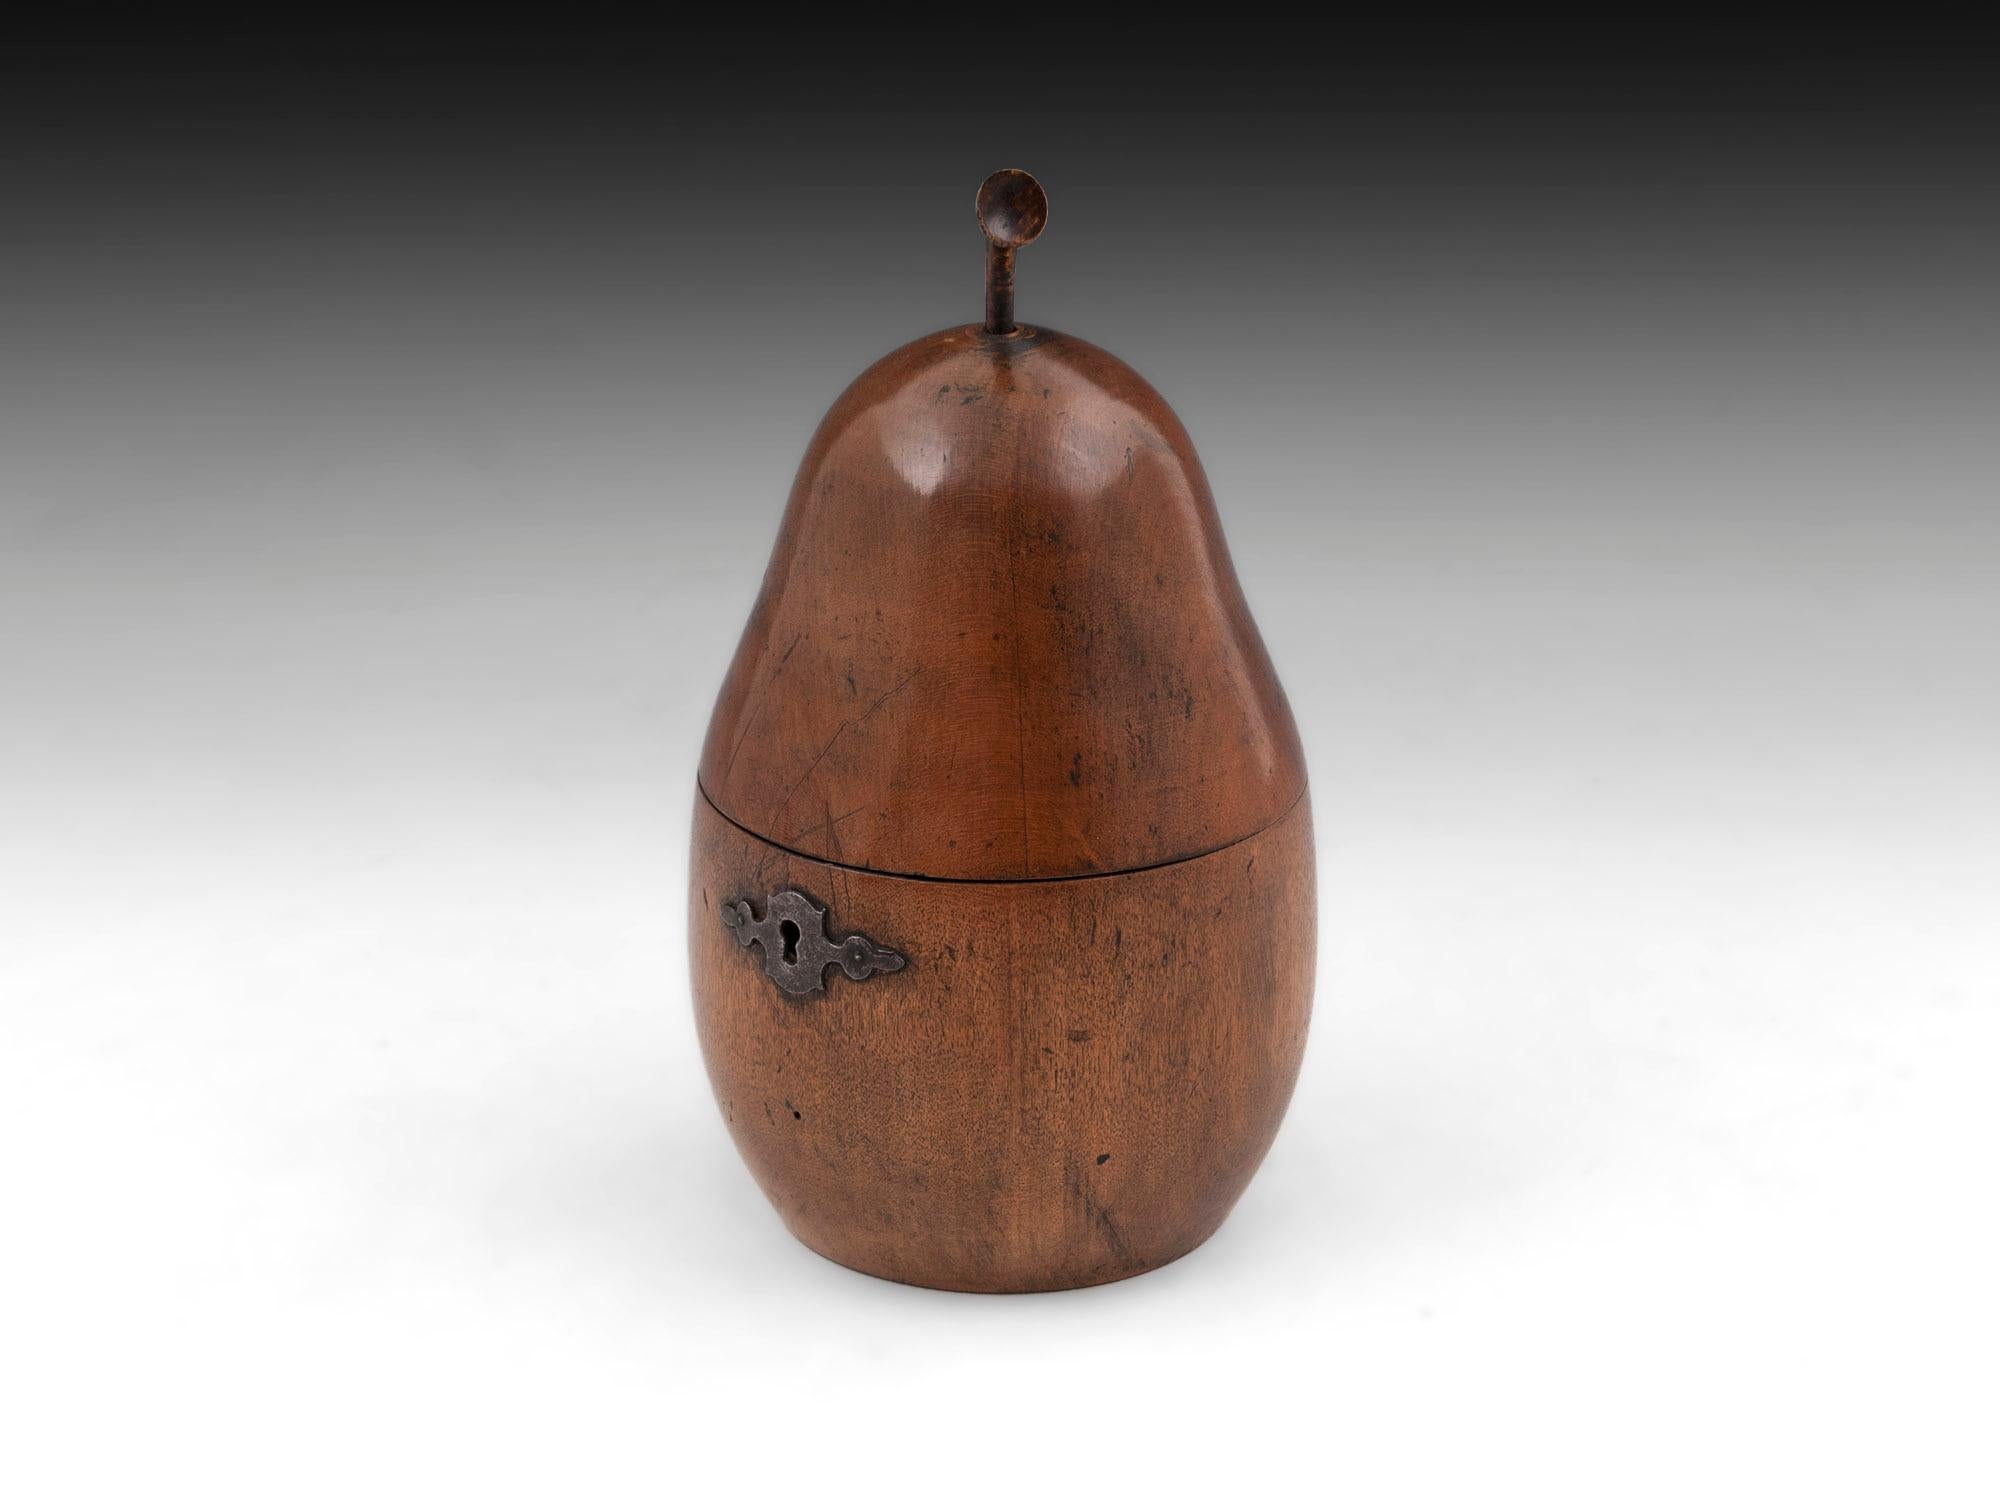 Sycamore Antique Pear Fruit Treen Tea Caddy For Sale